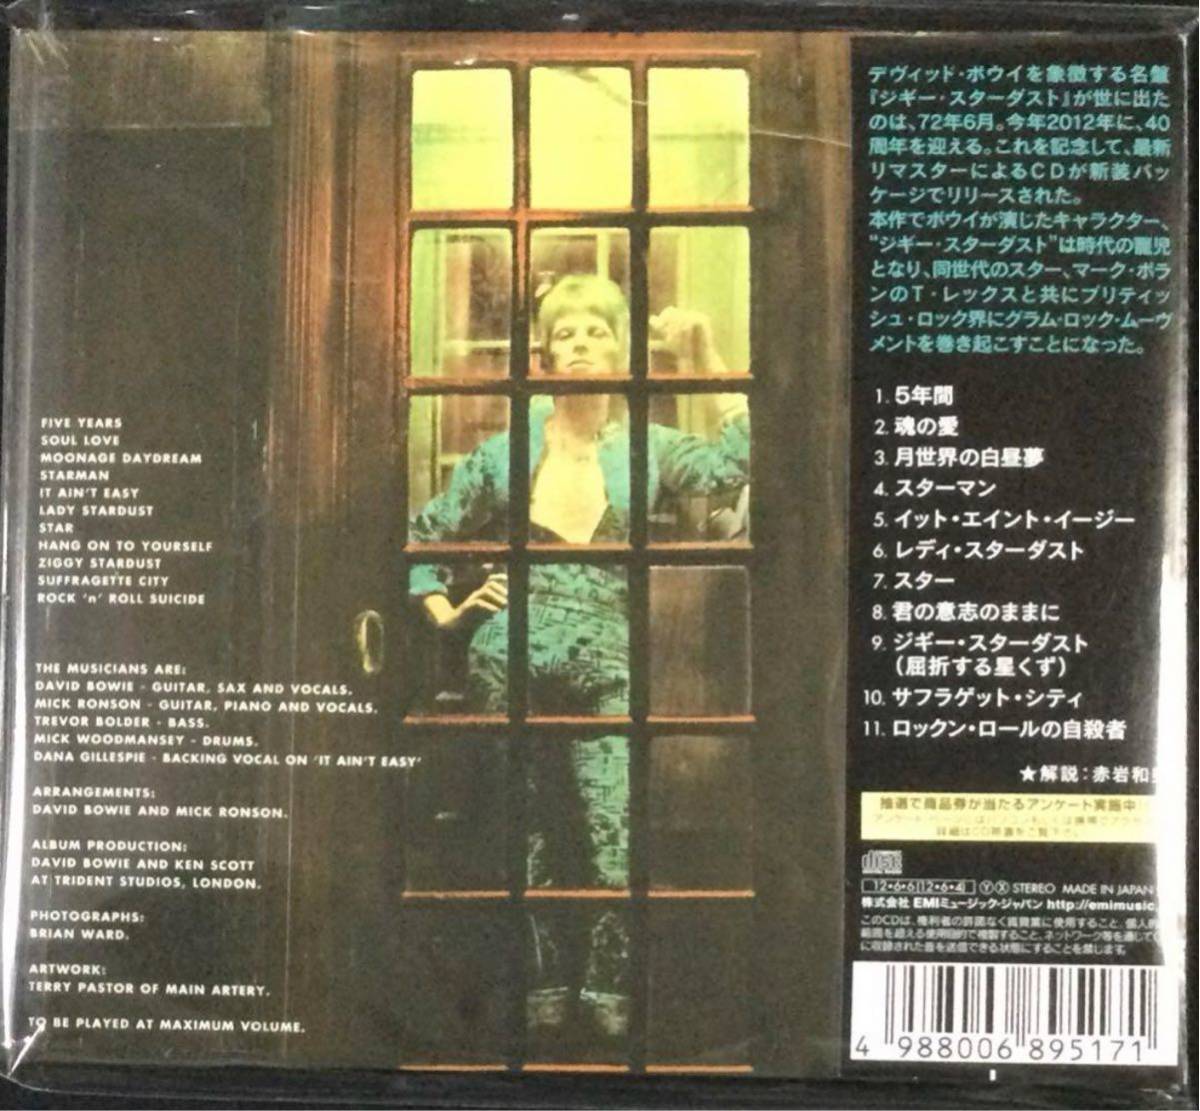 David Bowie / デヴィッド・ボウイ / ジギー・スターダスト40周年記念盤 /THE RISE AND FALL OF ZIGGY STARDUST AND THE SPIDERS FROM MARS